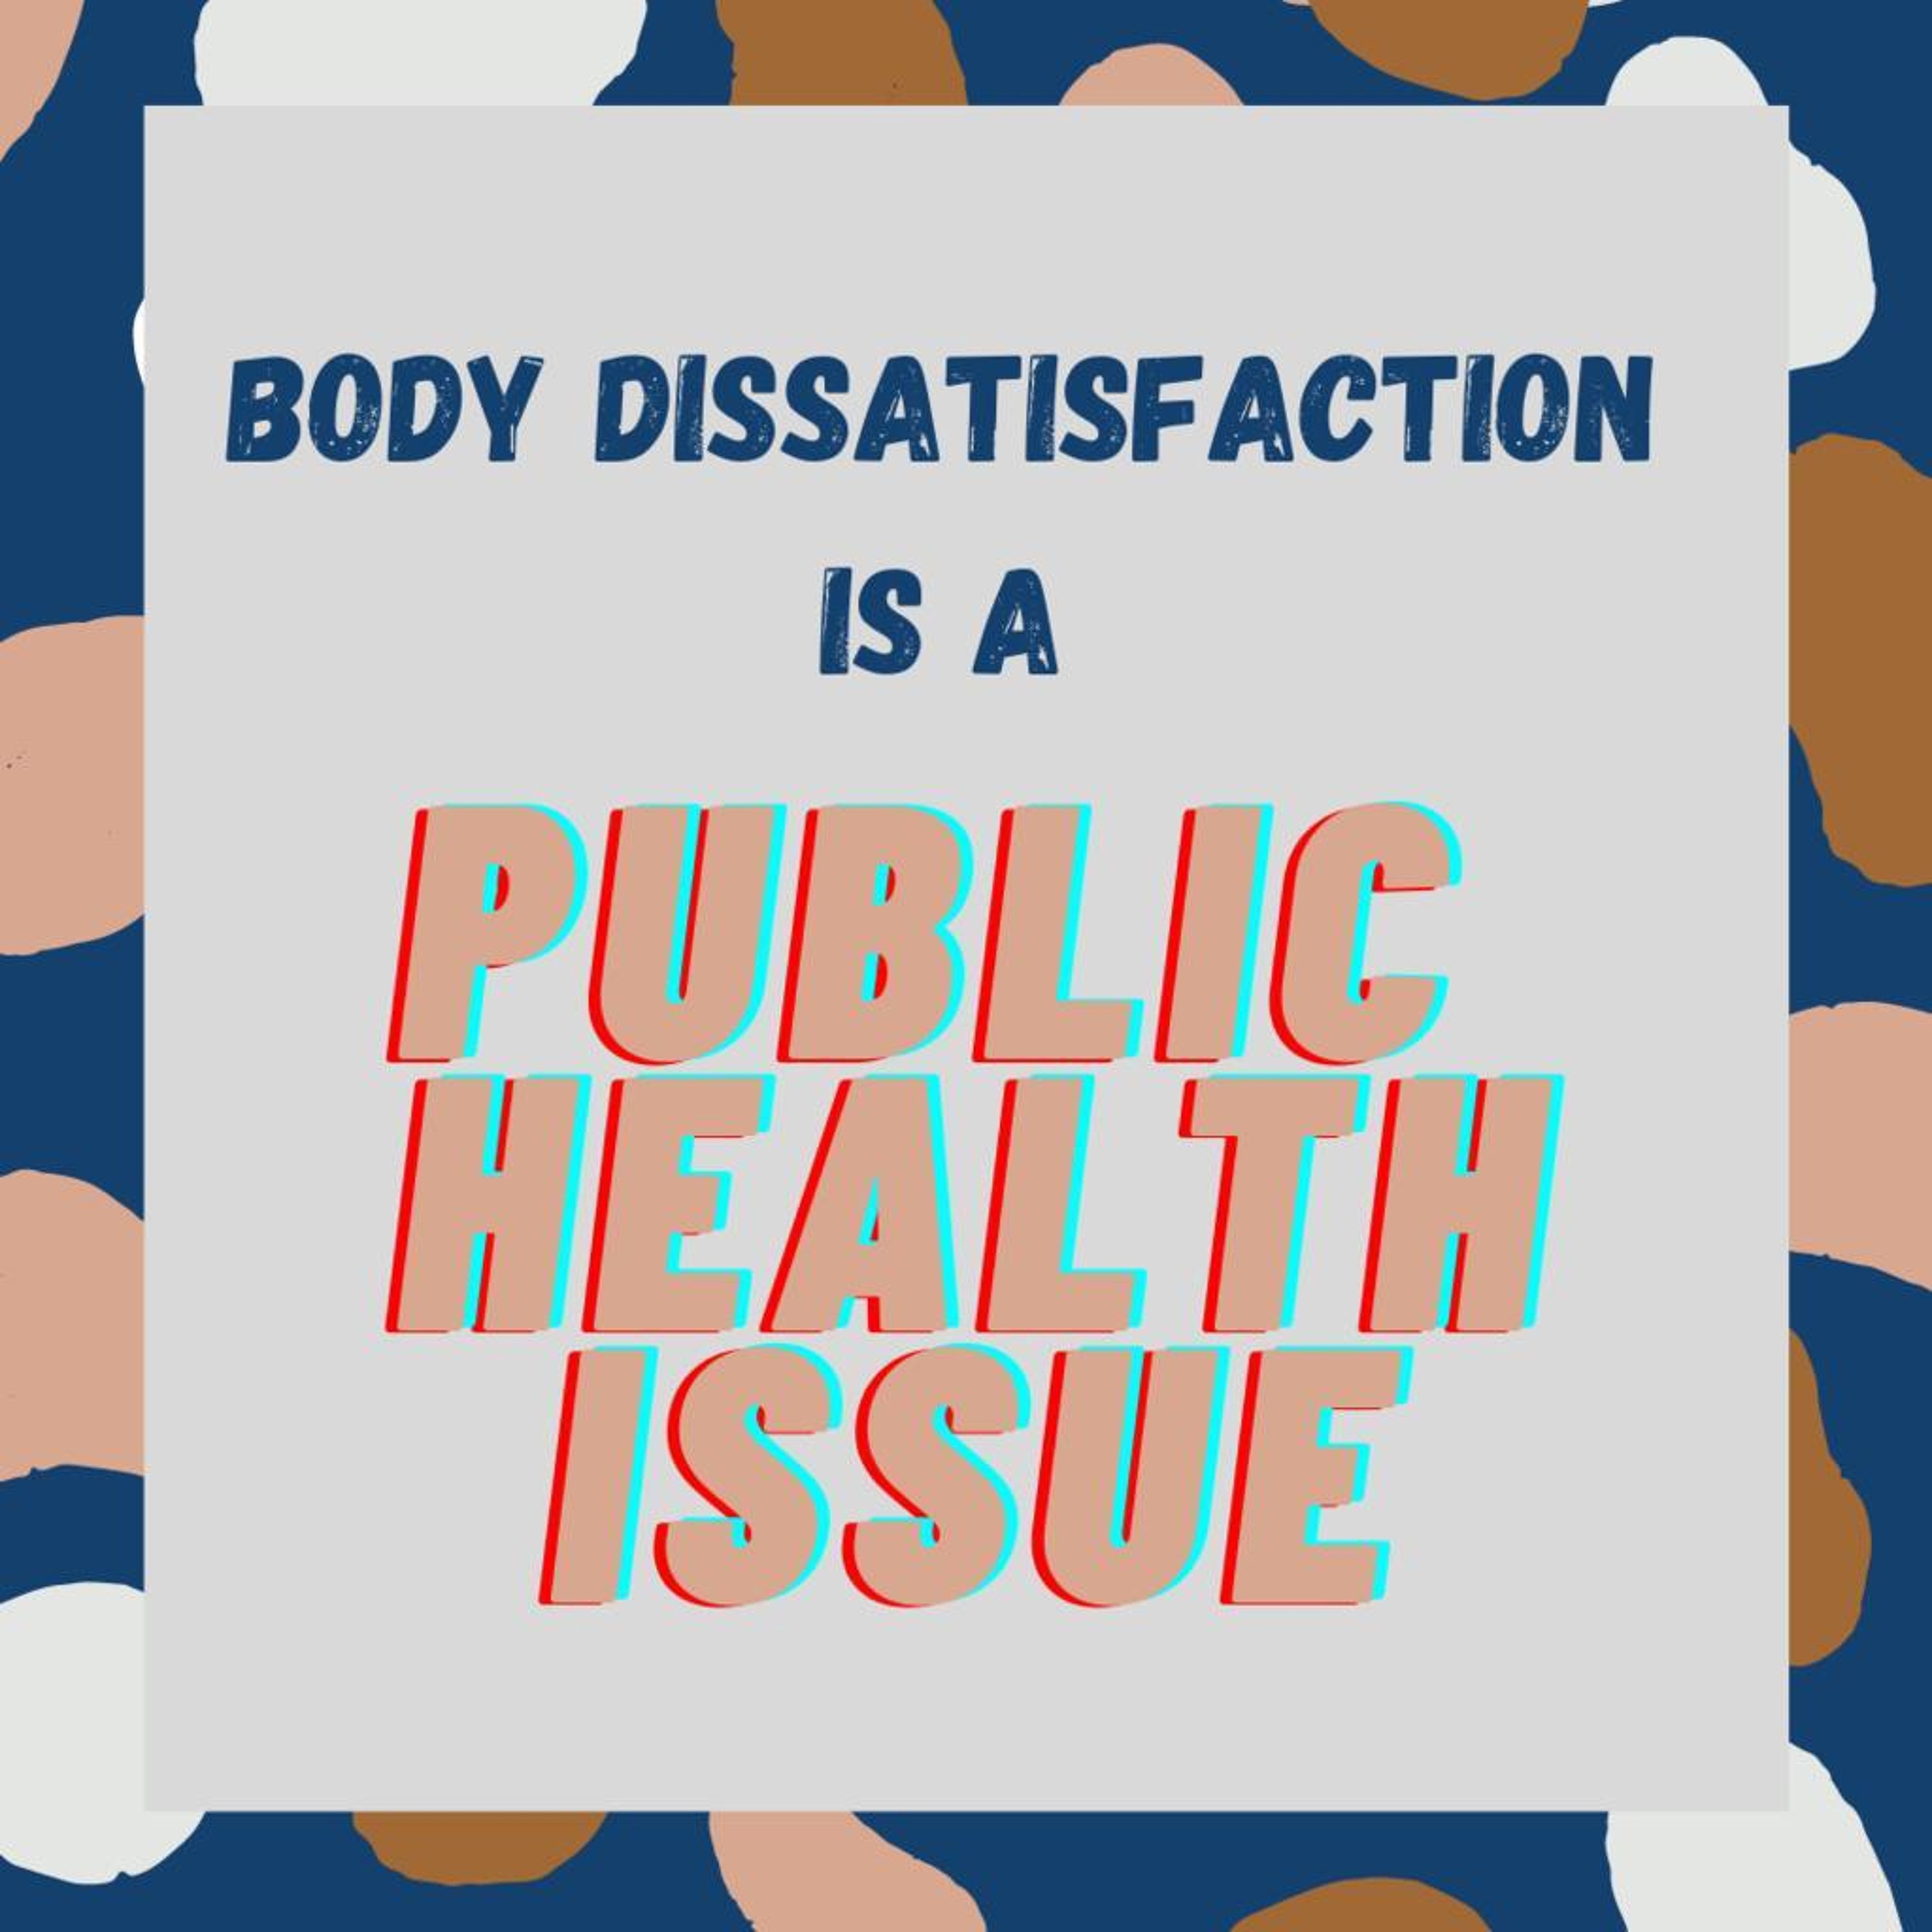 55: Body Dissatisfaction is a Public Health Issue